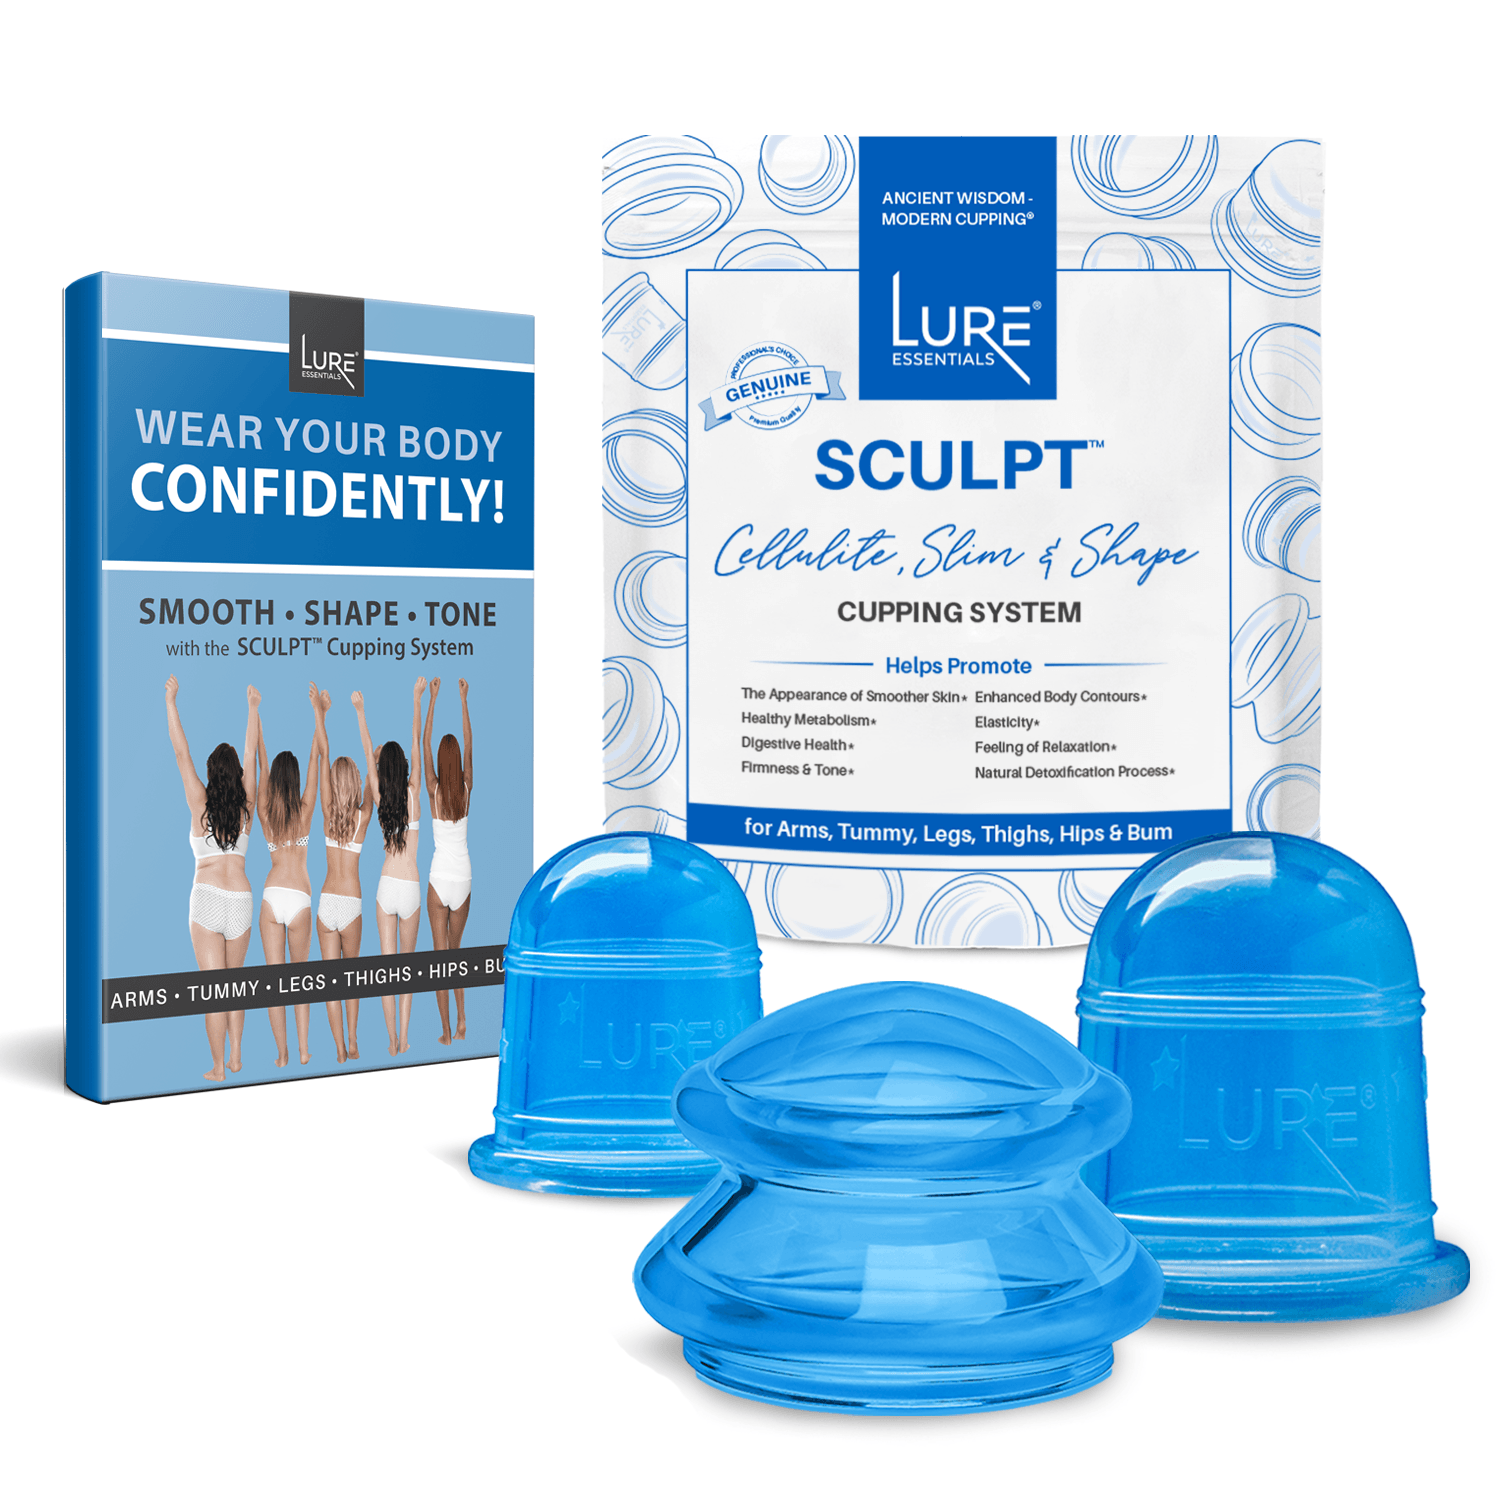 Lure Essentials Glam Chic Face & Eyes Cupping Set - Blue 